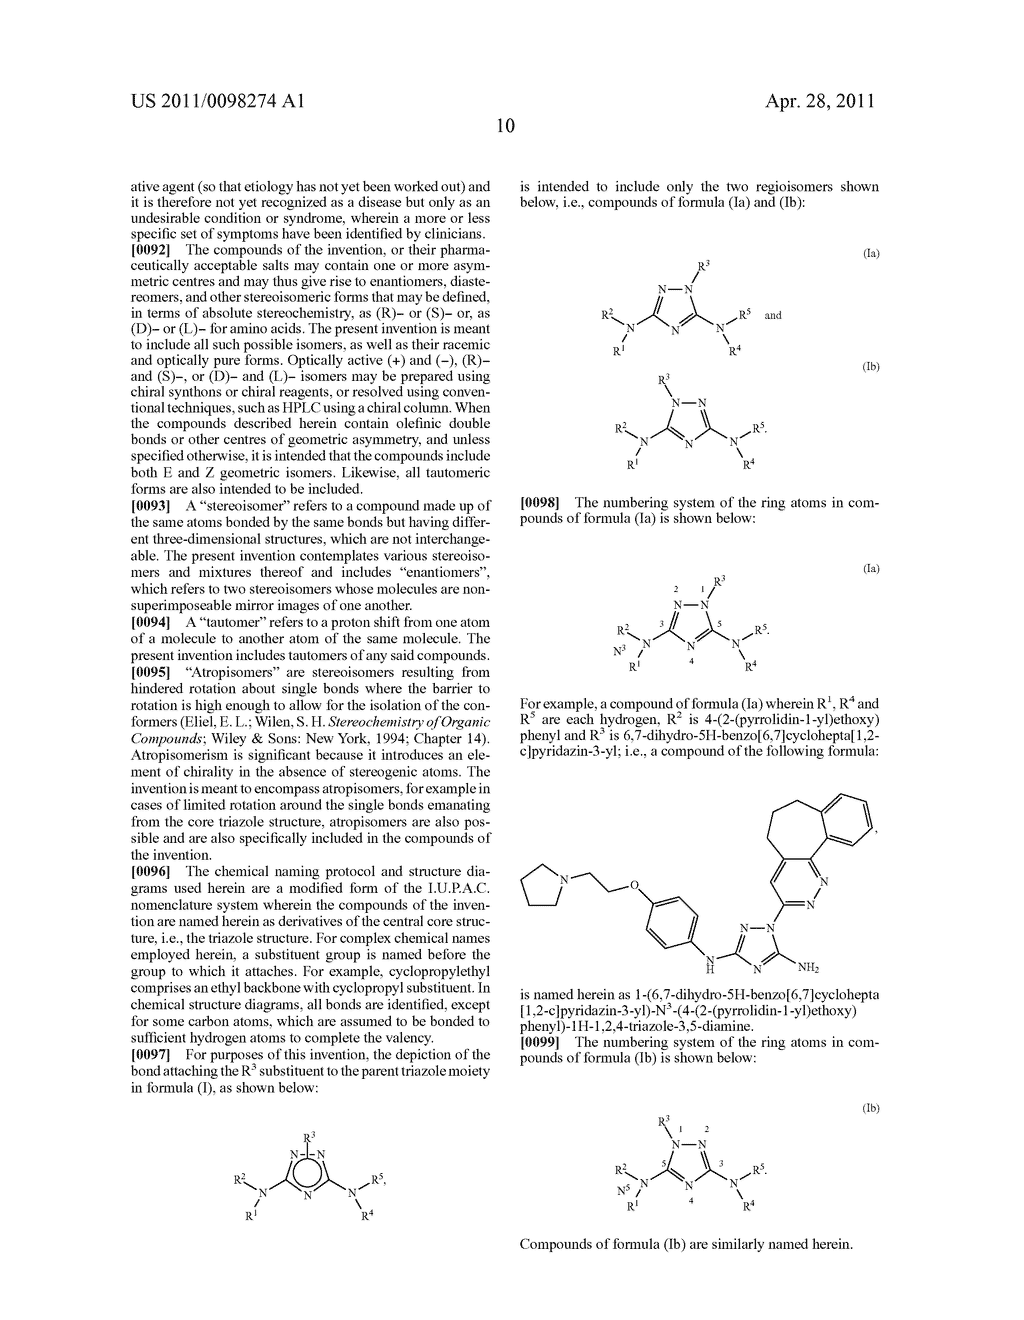 POLYCYCLIC HETEROARYL SUBSTITUTED TRIAZOLES USEFUL AS AXL INHIBITORS - diagram, schematic, and image 11